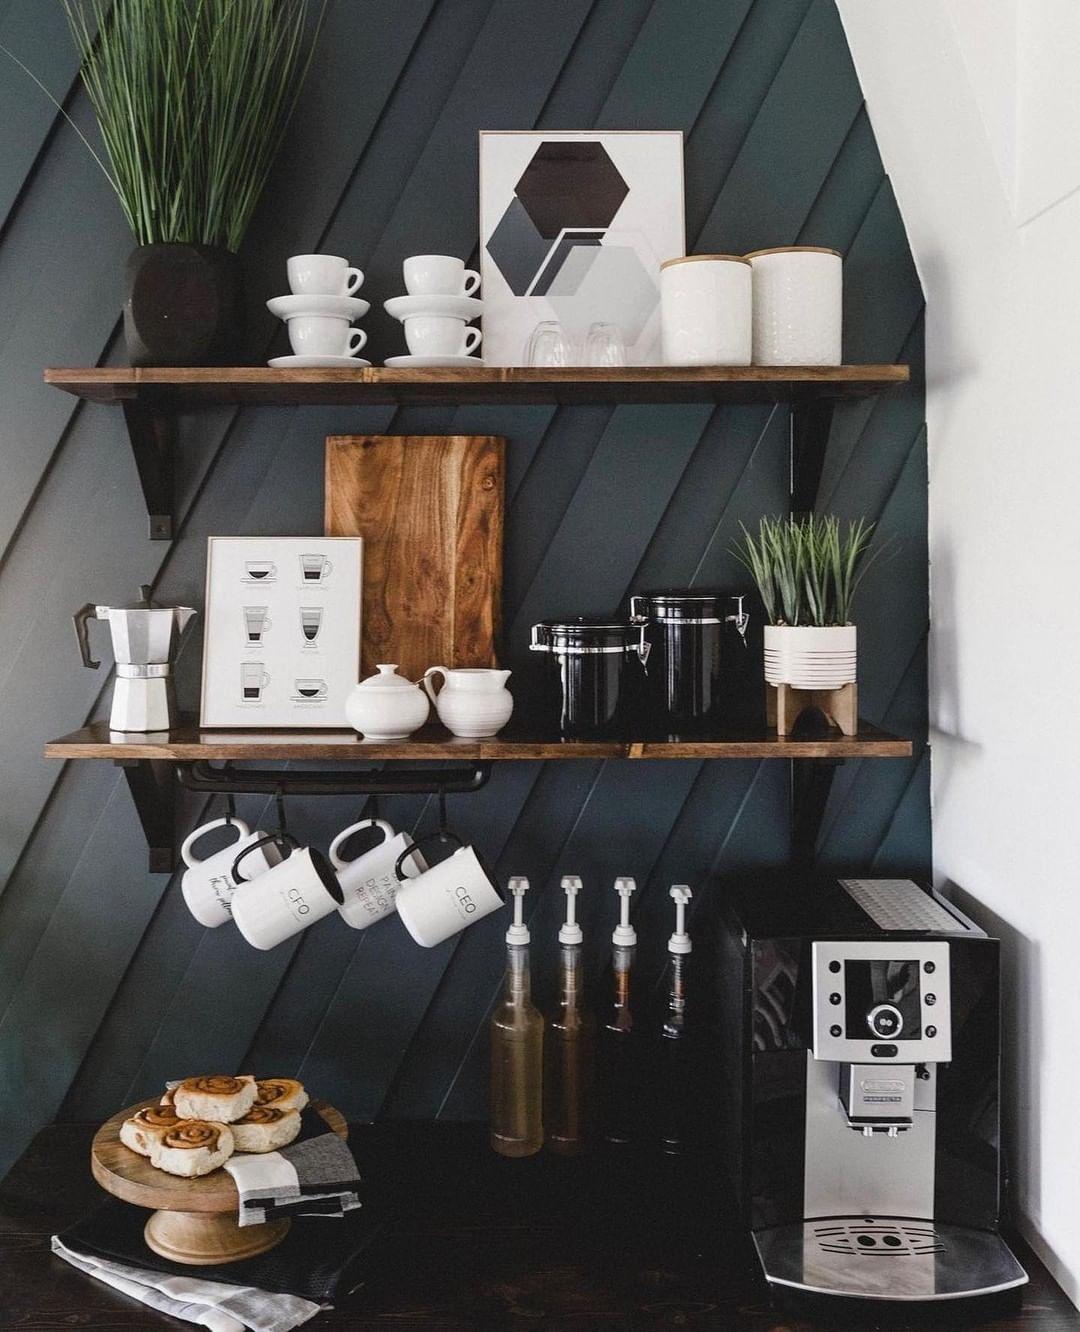 How to Create an Instagram-Worthy Kitchen - your very own coffee station